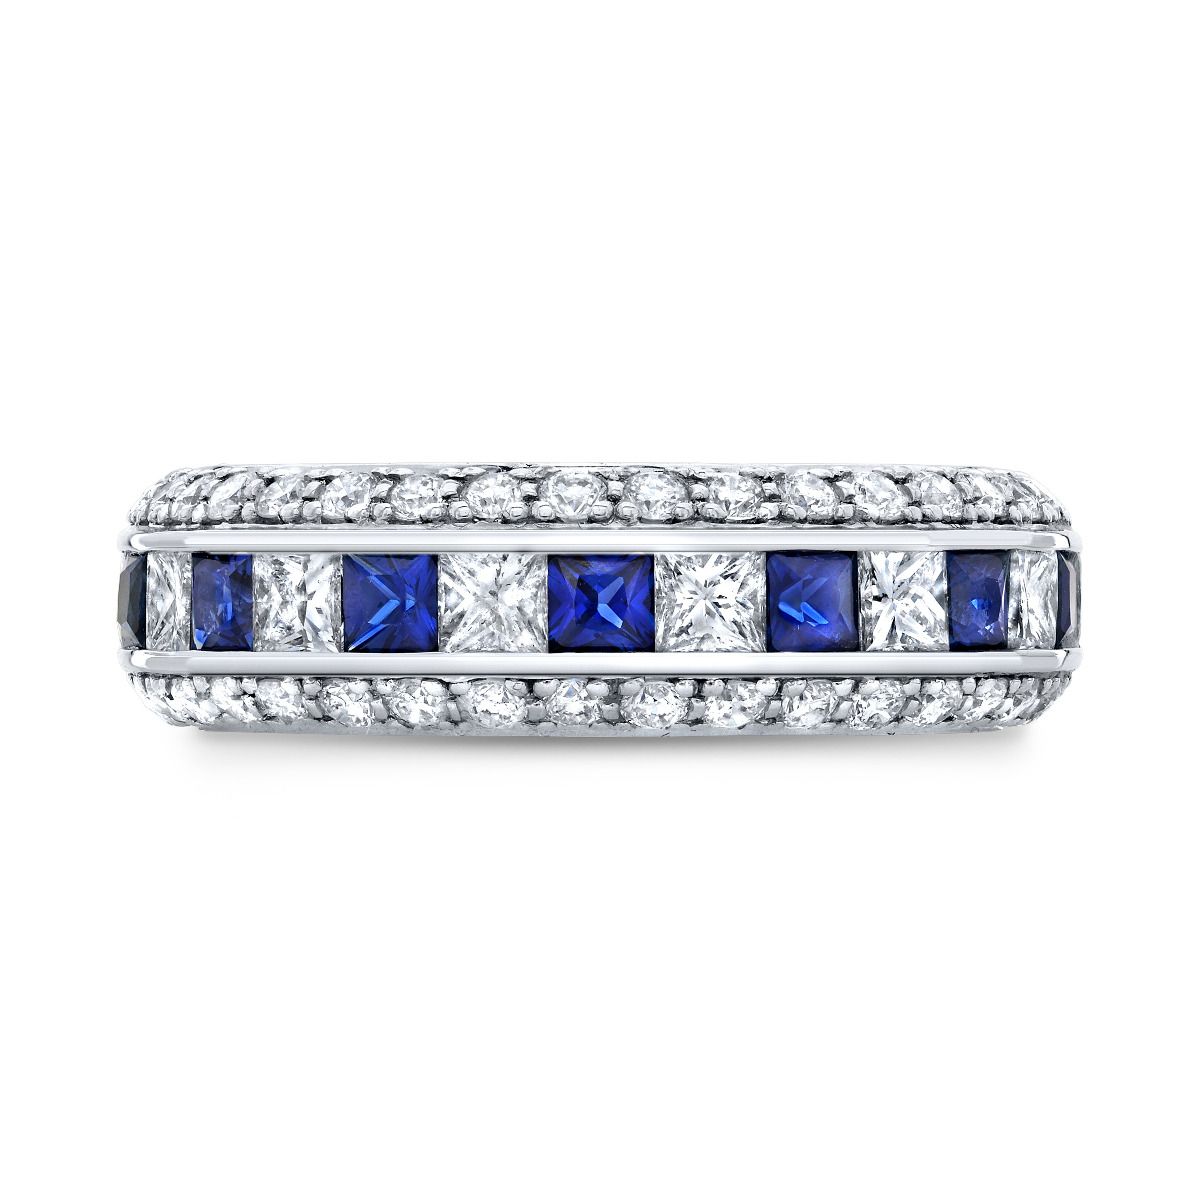 Blue Sapphires and Princess Cut Diamond Eternity Band in White Gold.